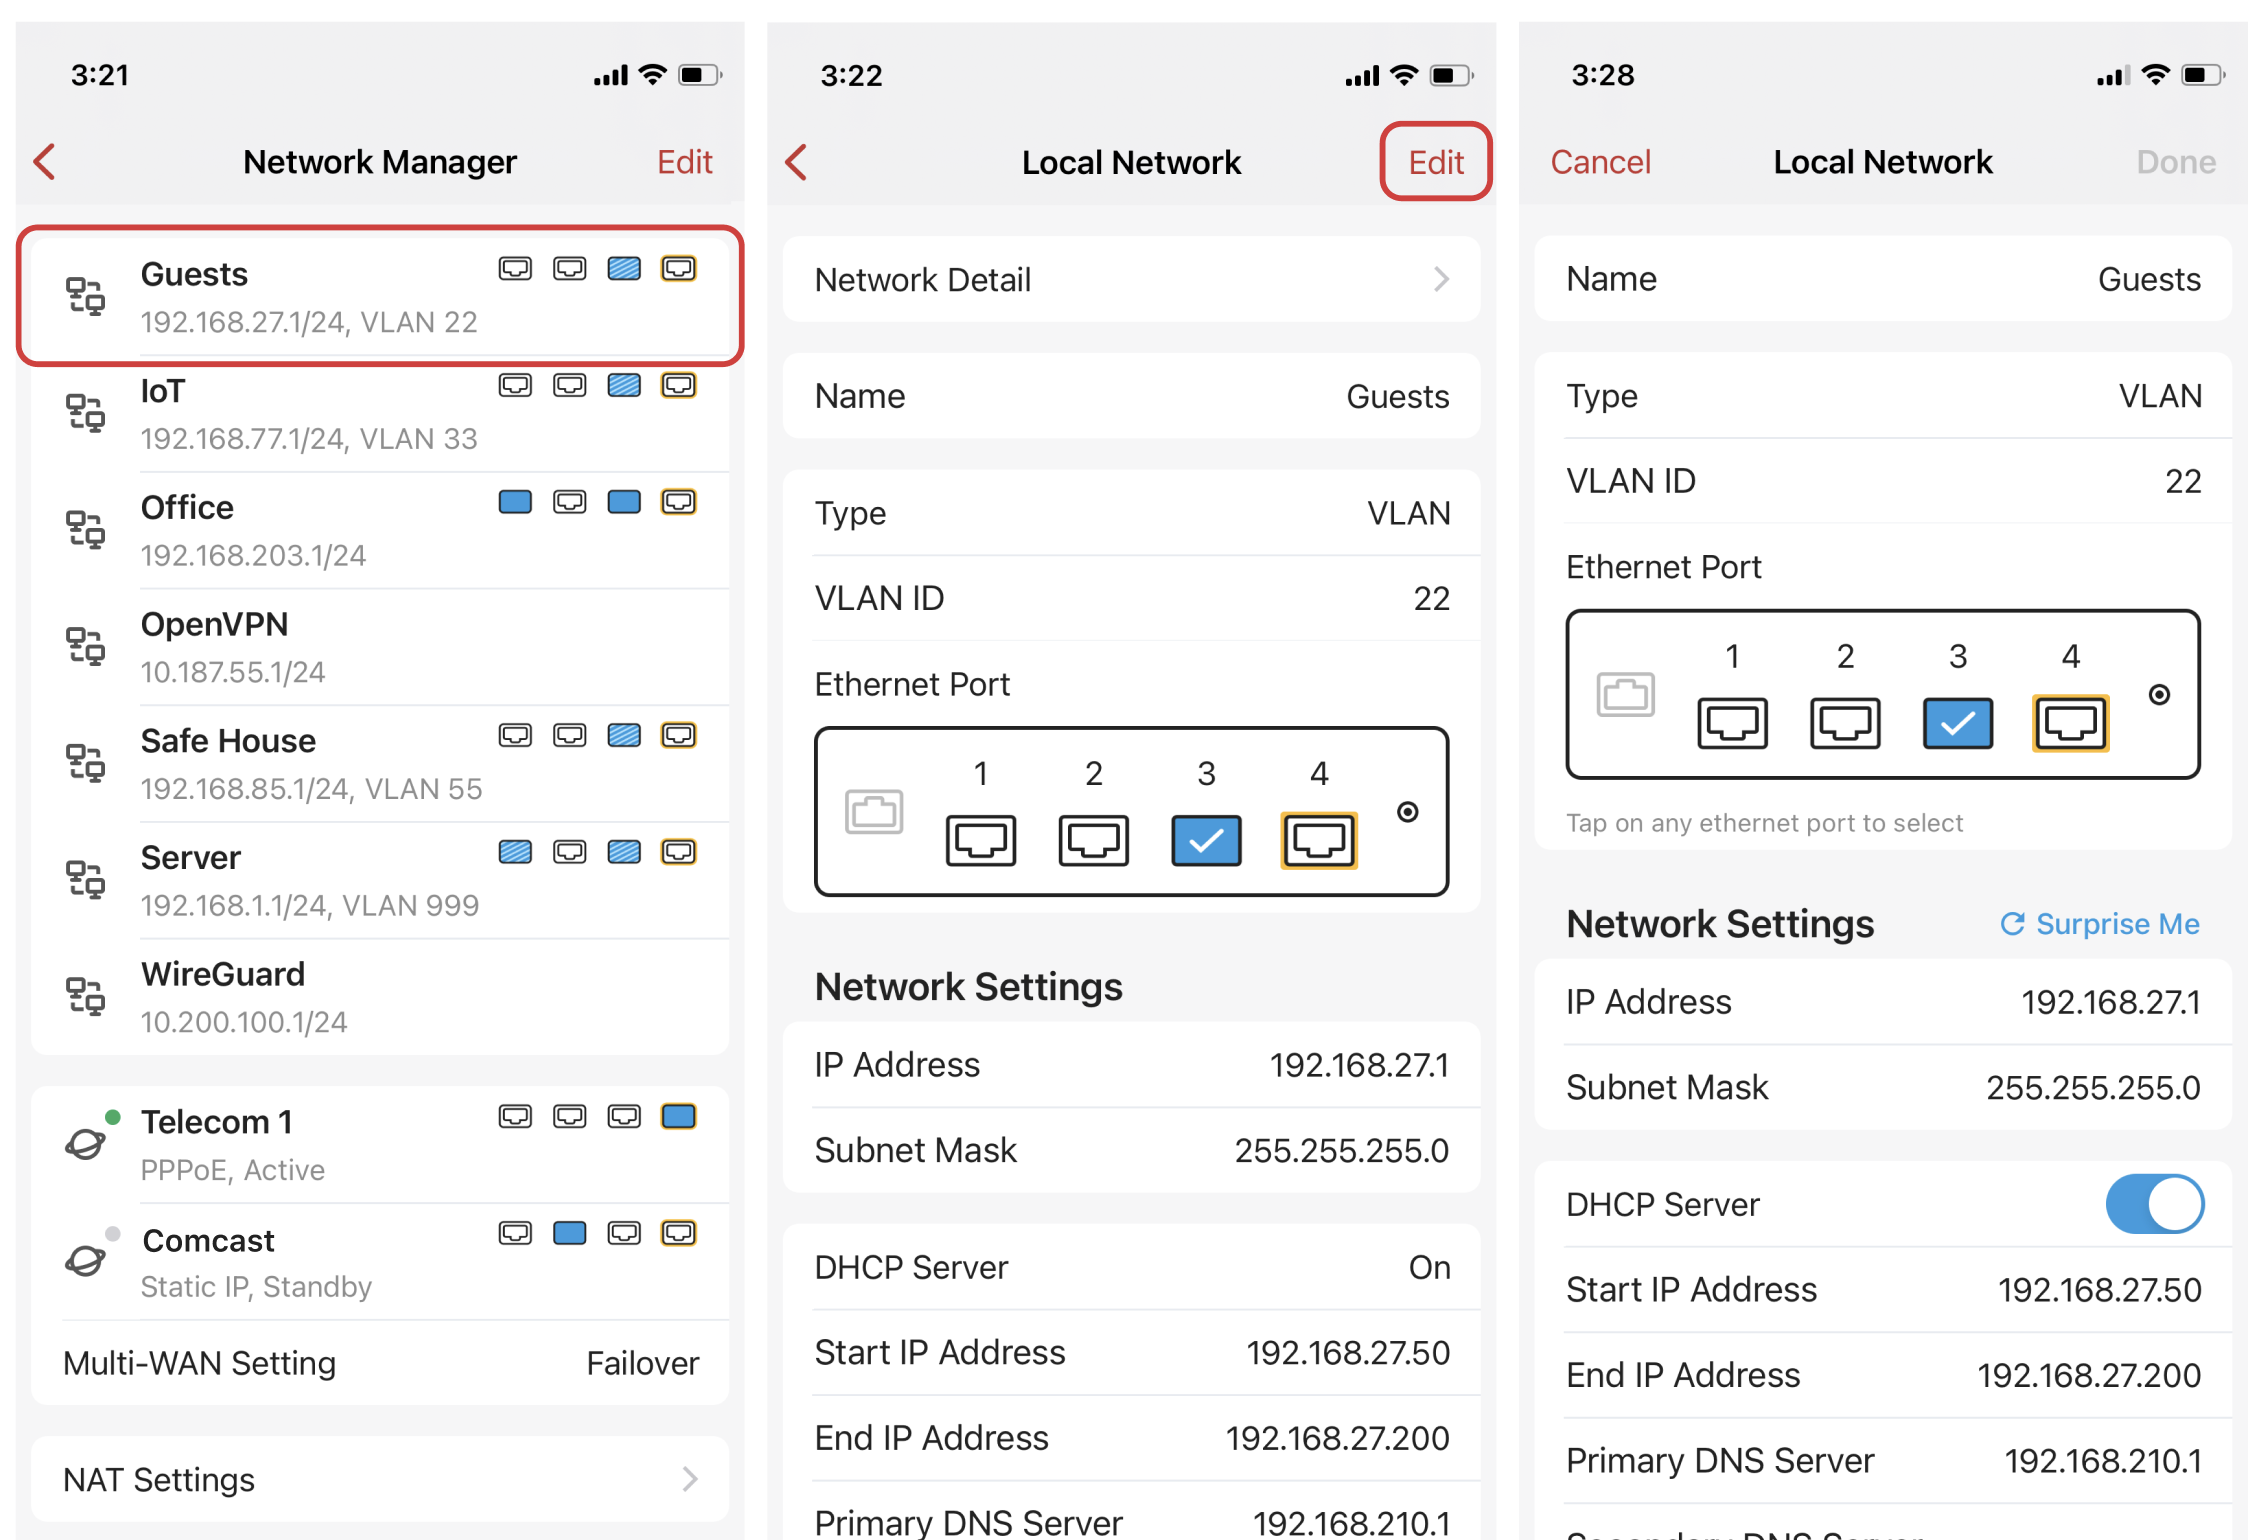 Enhancements such as editing network inside individual networks offered in 1.45 App Release